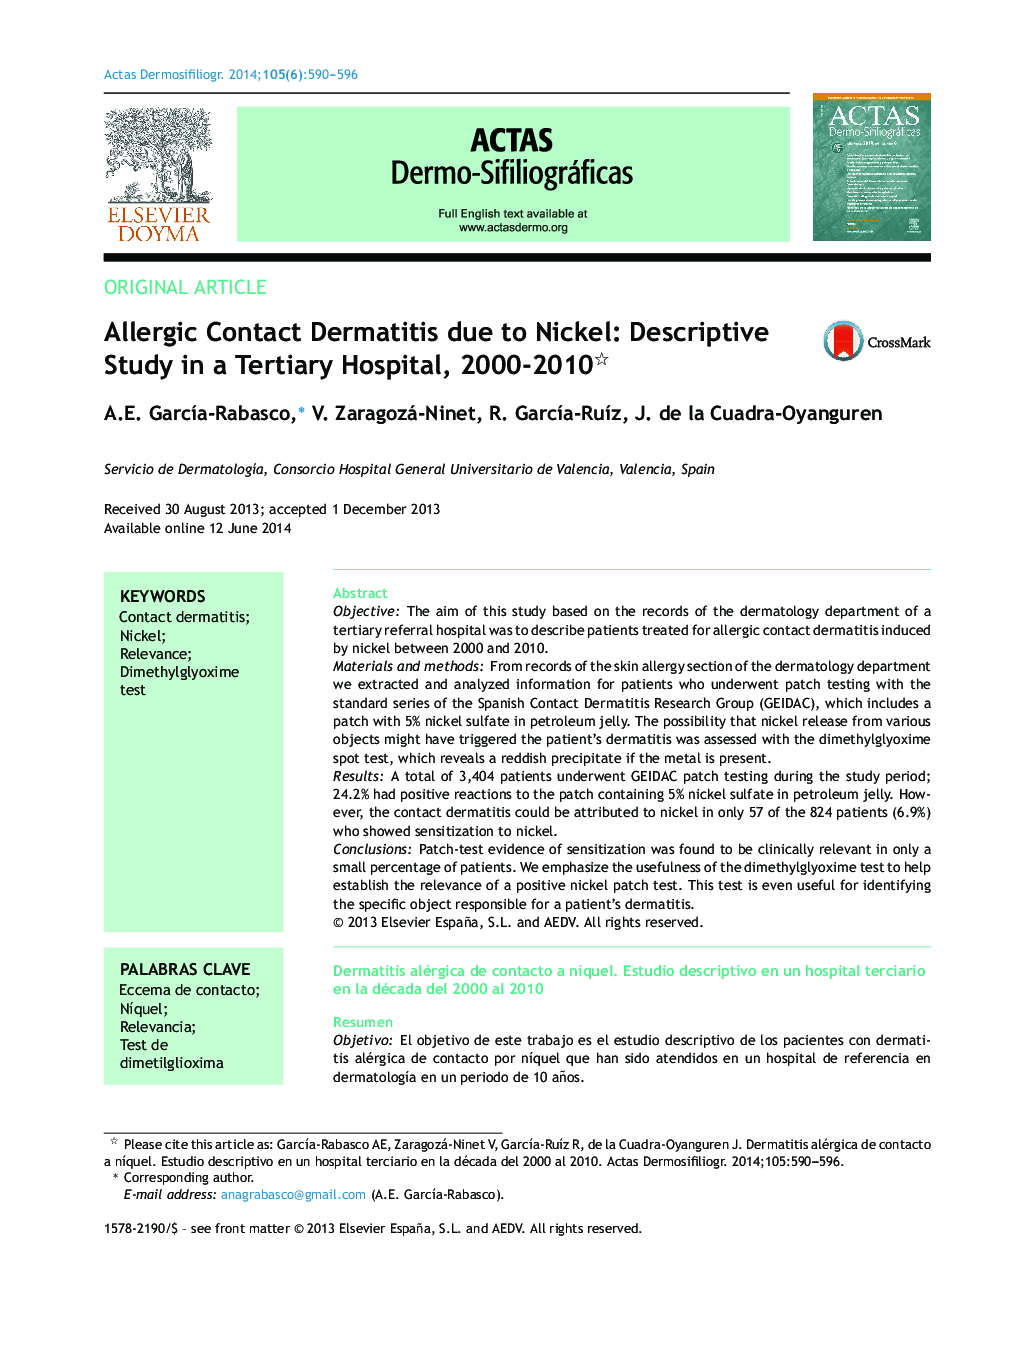 Allergic Contact Dermatitis due to Nickel: Descriptive Study in a Tertiary Hospital, 2000-2010